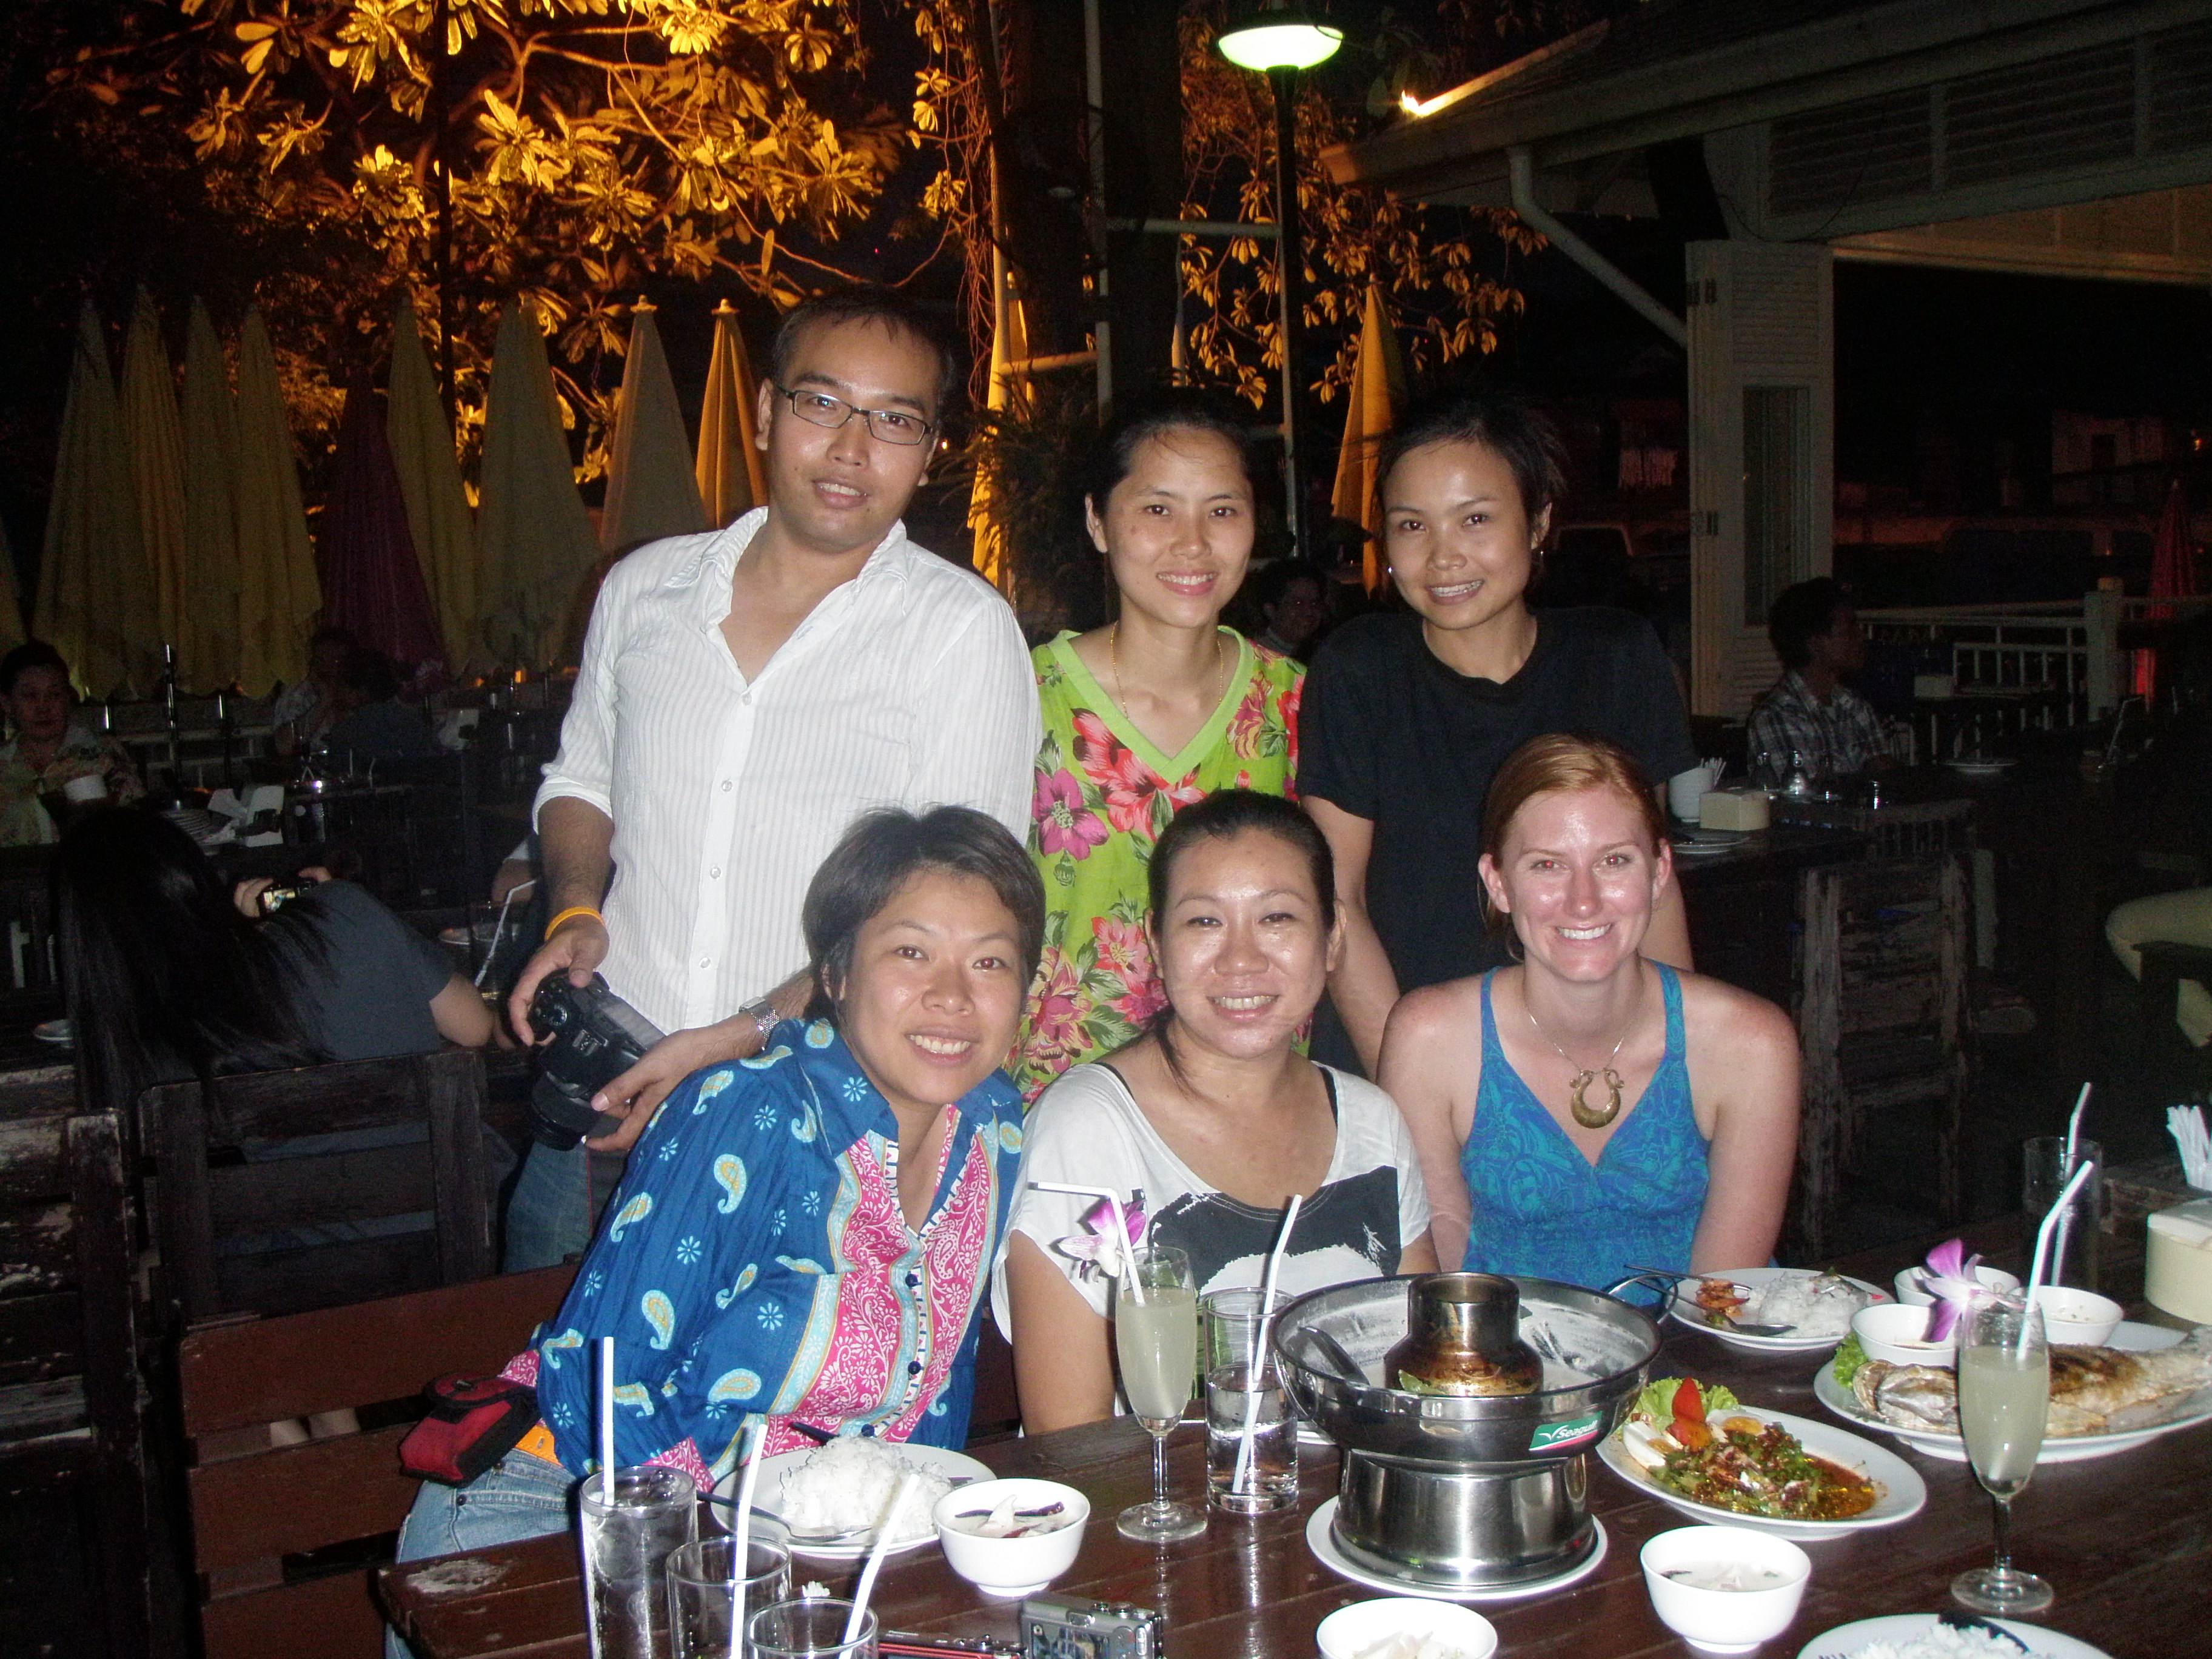 Last night of my trip, enjoying dinner with our fantastic Bangkok guides